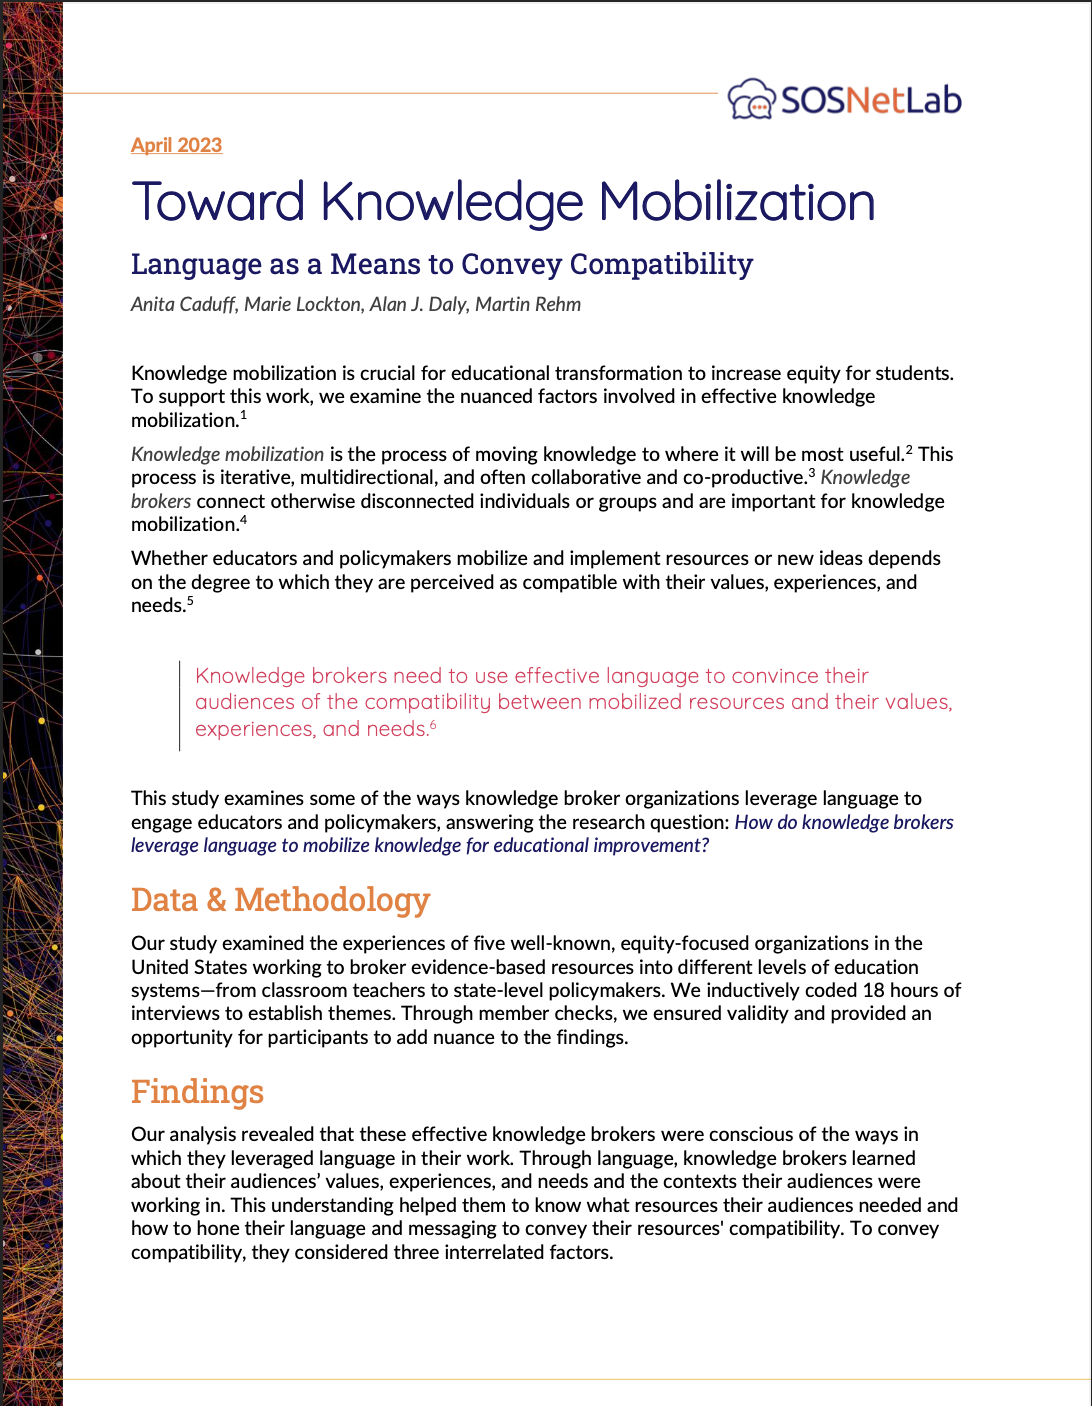 Beyond Knowledge Brokers: Uncovering Resource Architects in knowledge mobilization